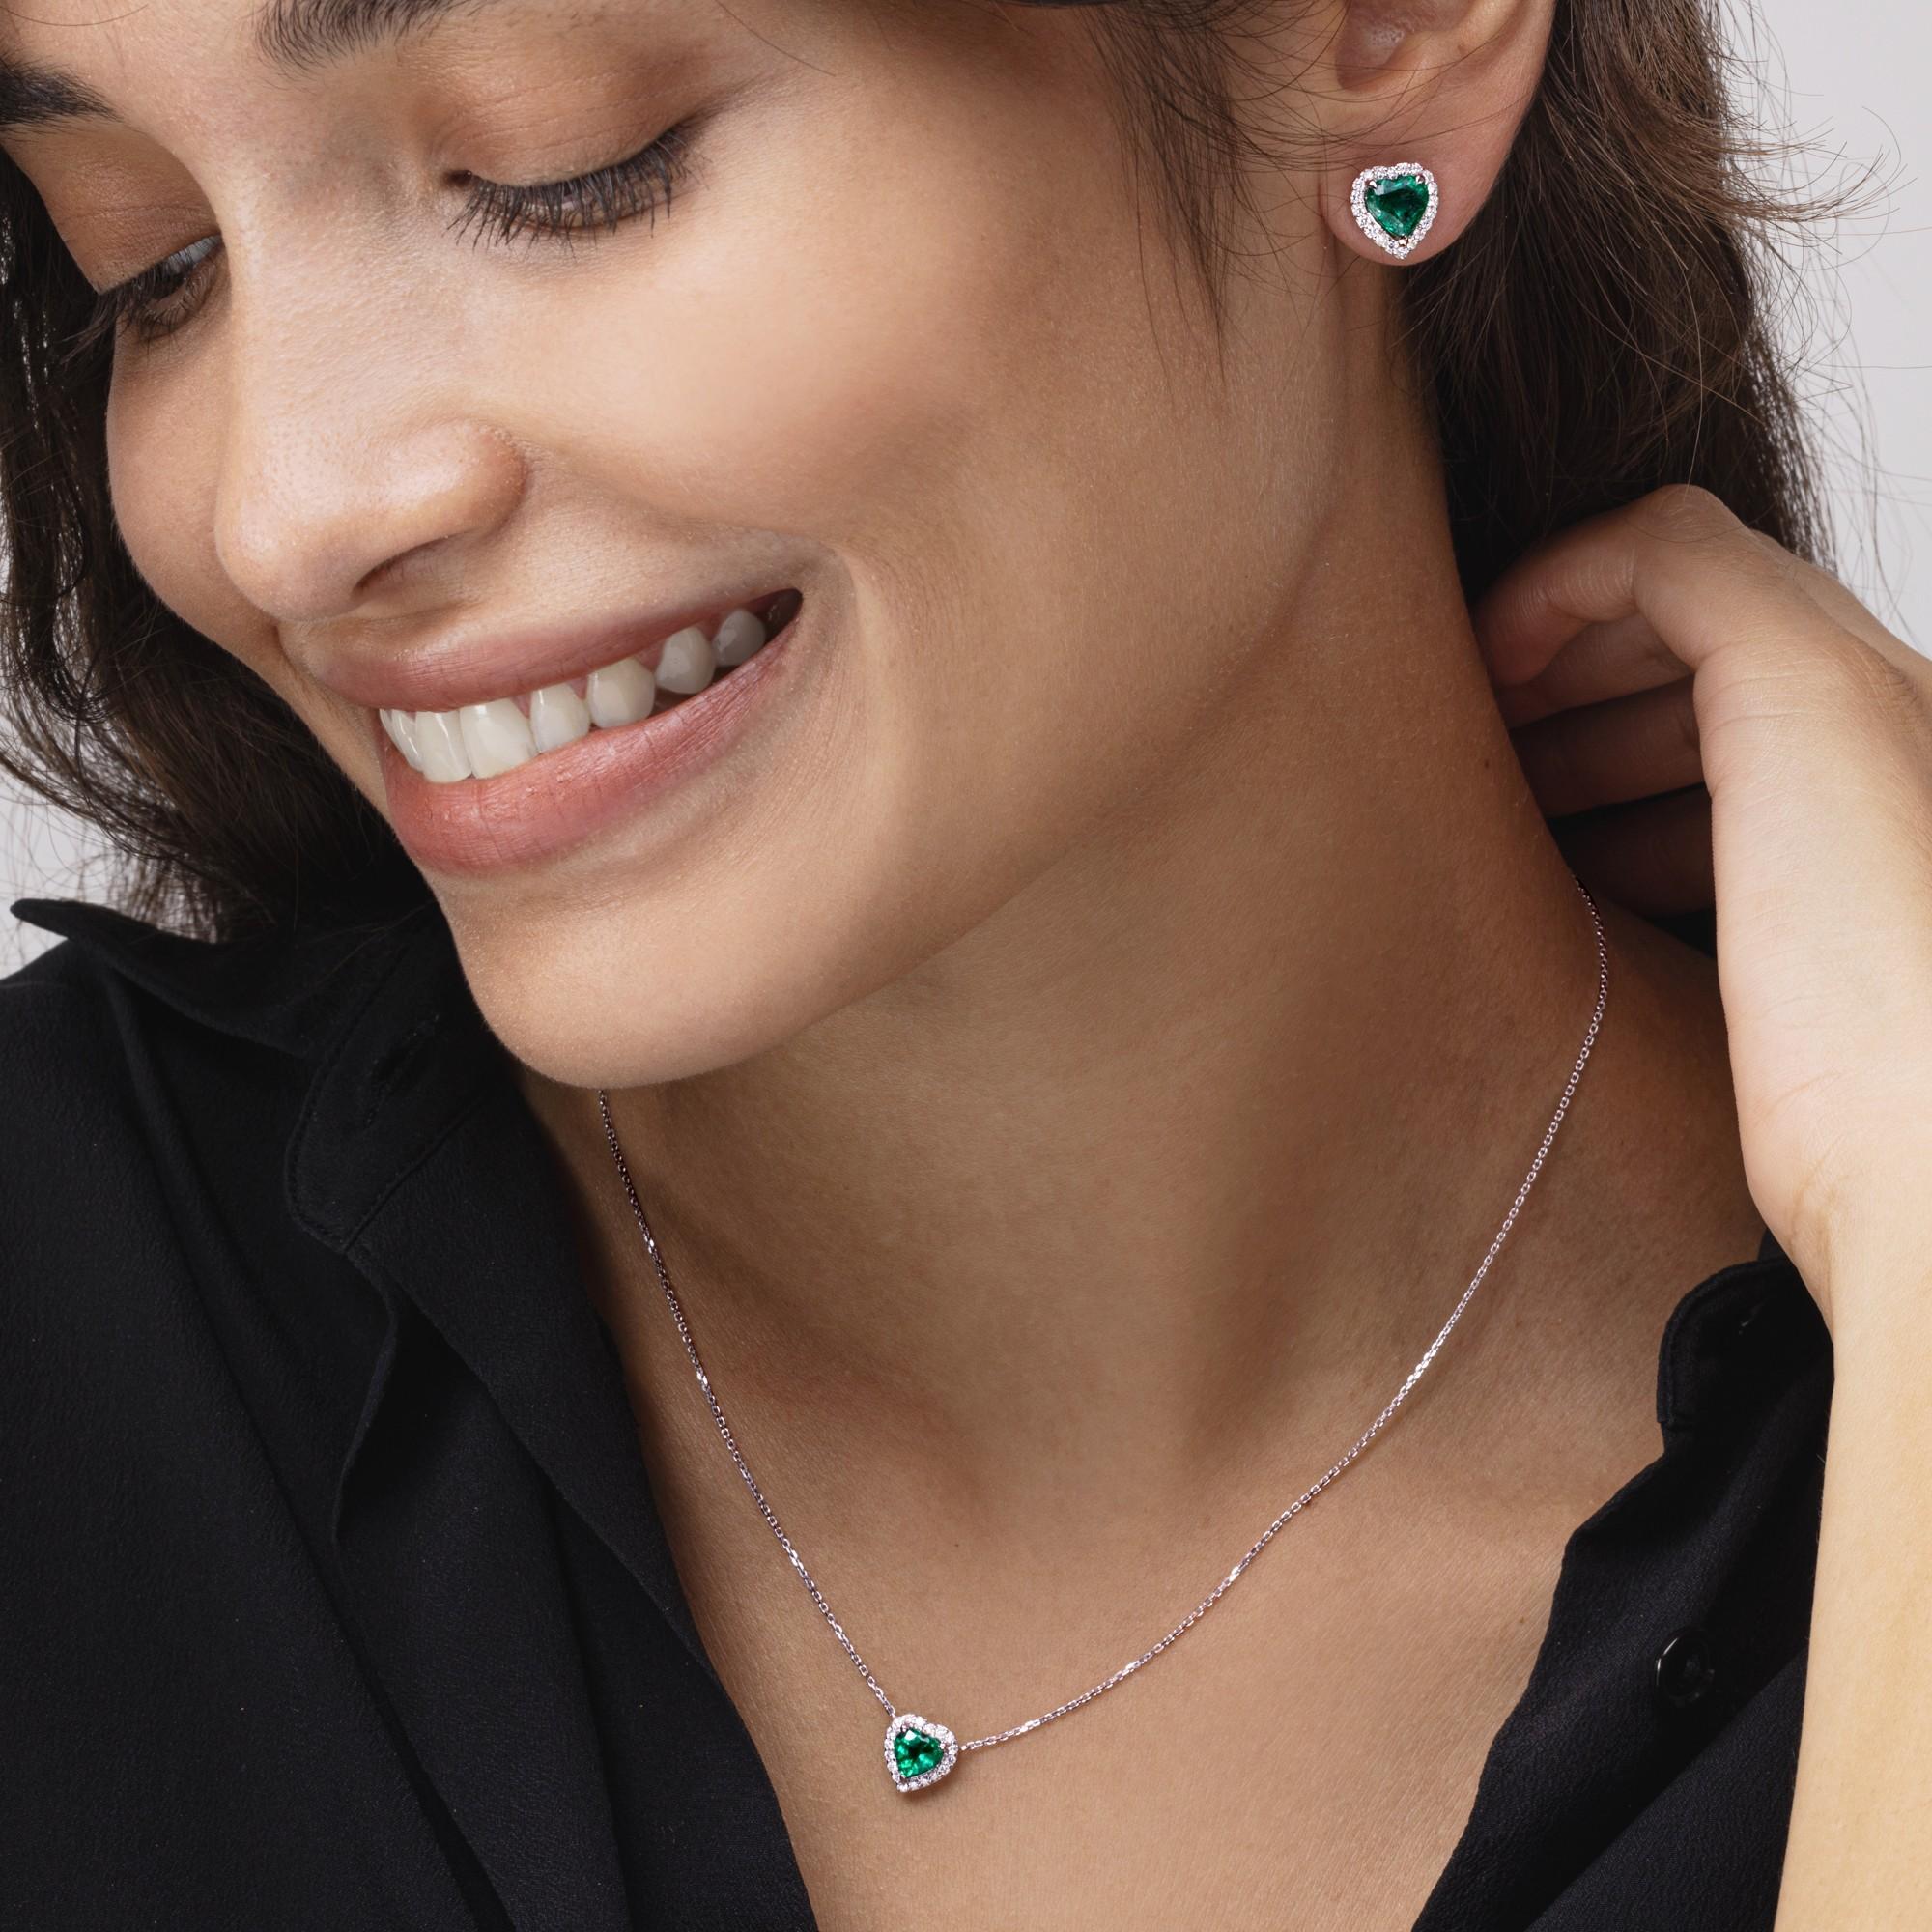 Alex Jona design collection, hand crafted in Italy, 18 karat white gold necklace centering a natural Zambia heart cut emerald weighing 0.60 carats in total surrounded by 0.14 carats of white diamonds, F-G color, VS clarity.

Alex Jona jewels stand